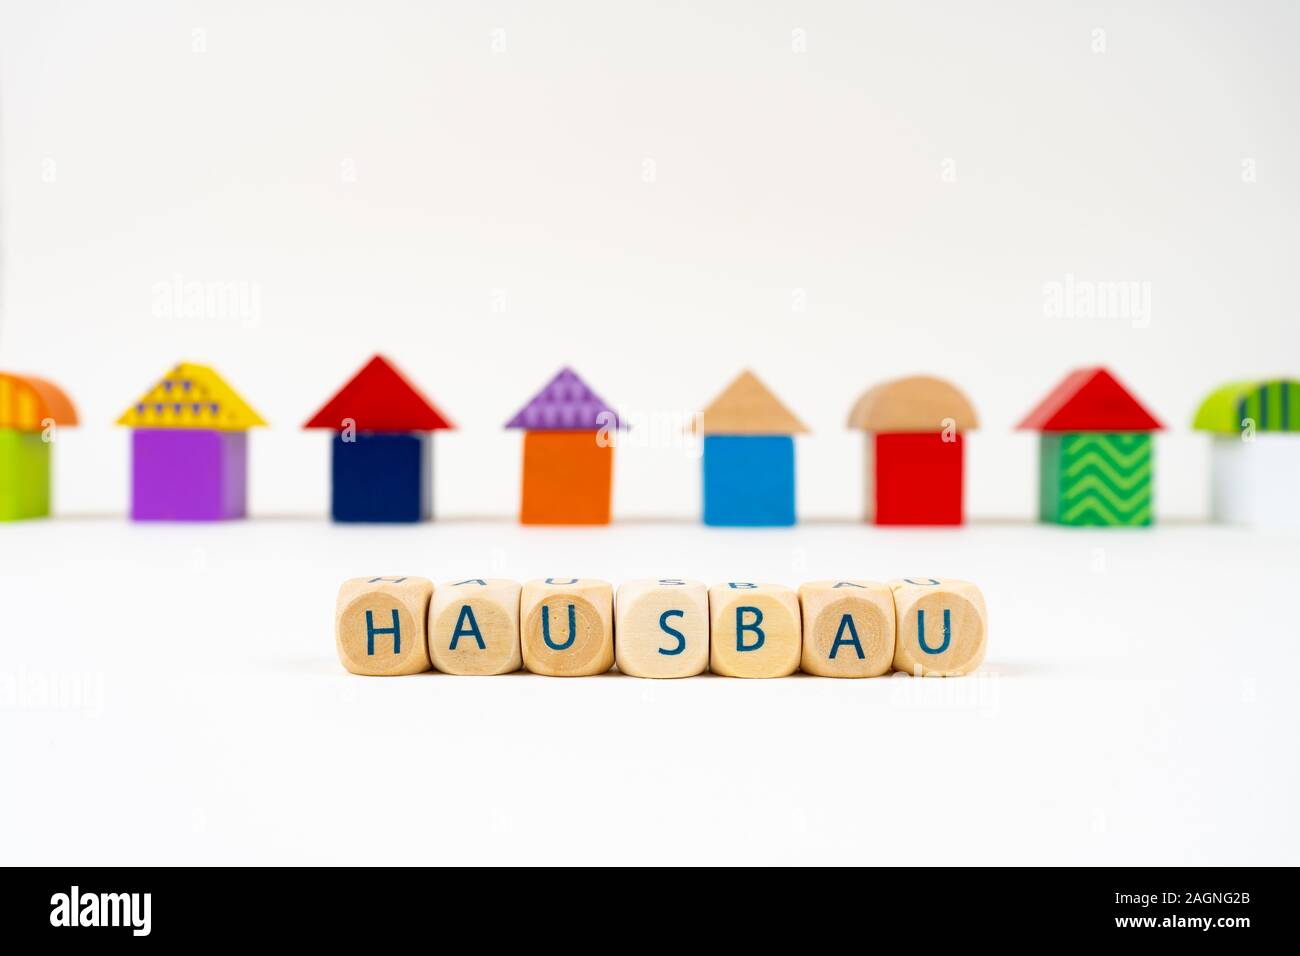 Wooden block with letters saying 'Hausbau' (German for building a house) in front of colorful toy houses Stock Photo